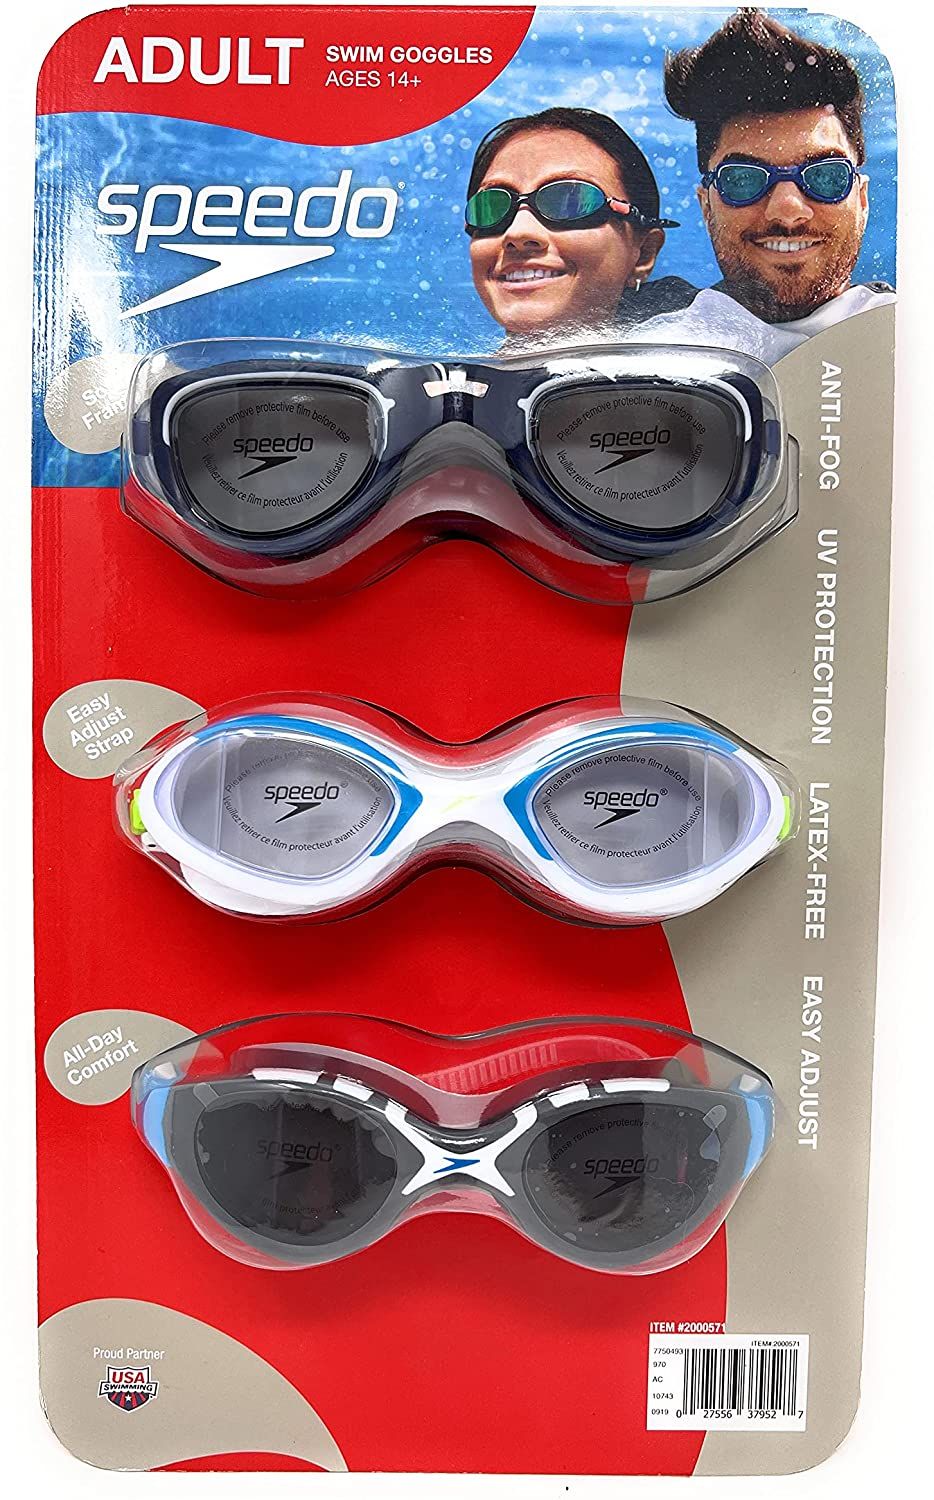 The 10 Best Swimming Goggles of 2021 - ReviewThis